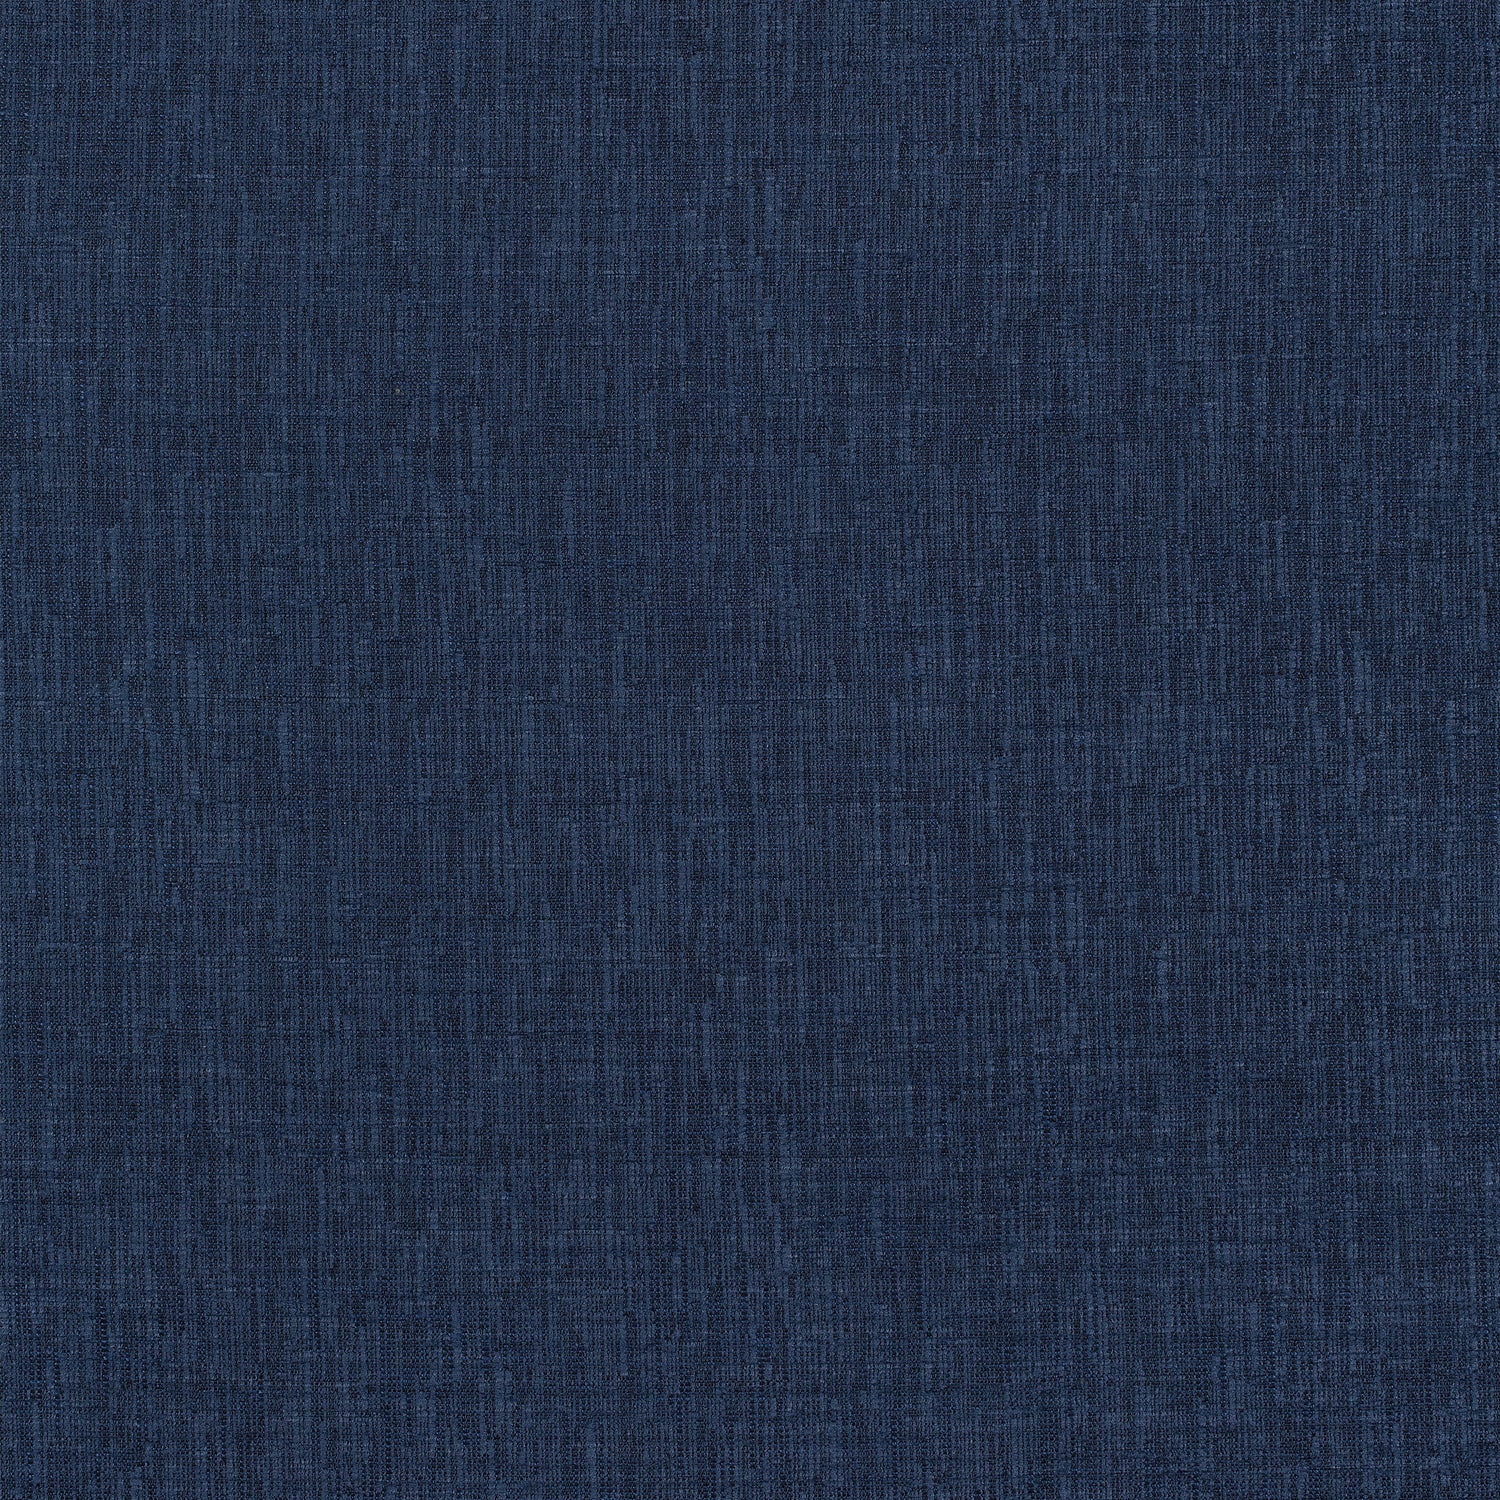 Montage fabric in navy color - pattern number W80480 - by Thibaut in the Mosaic collection